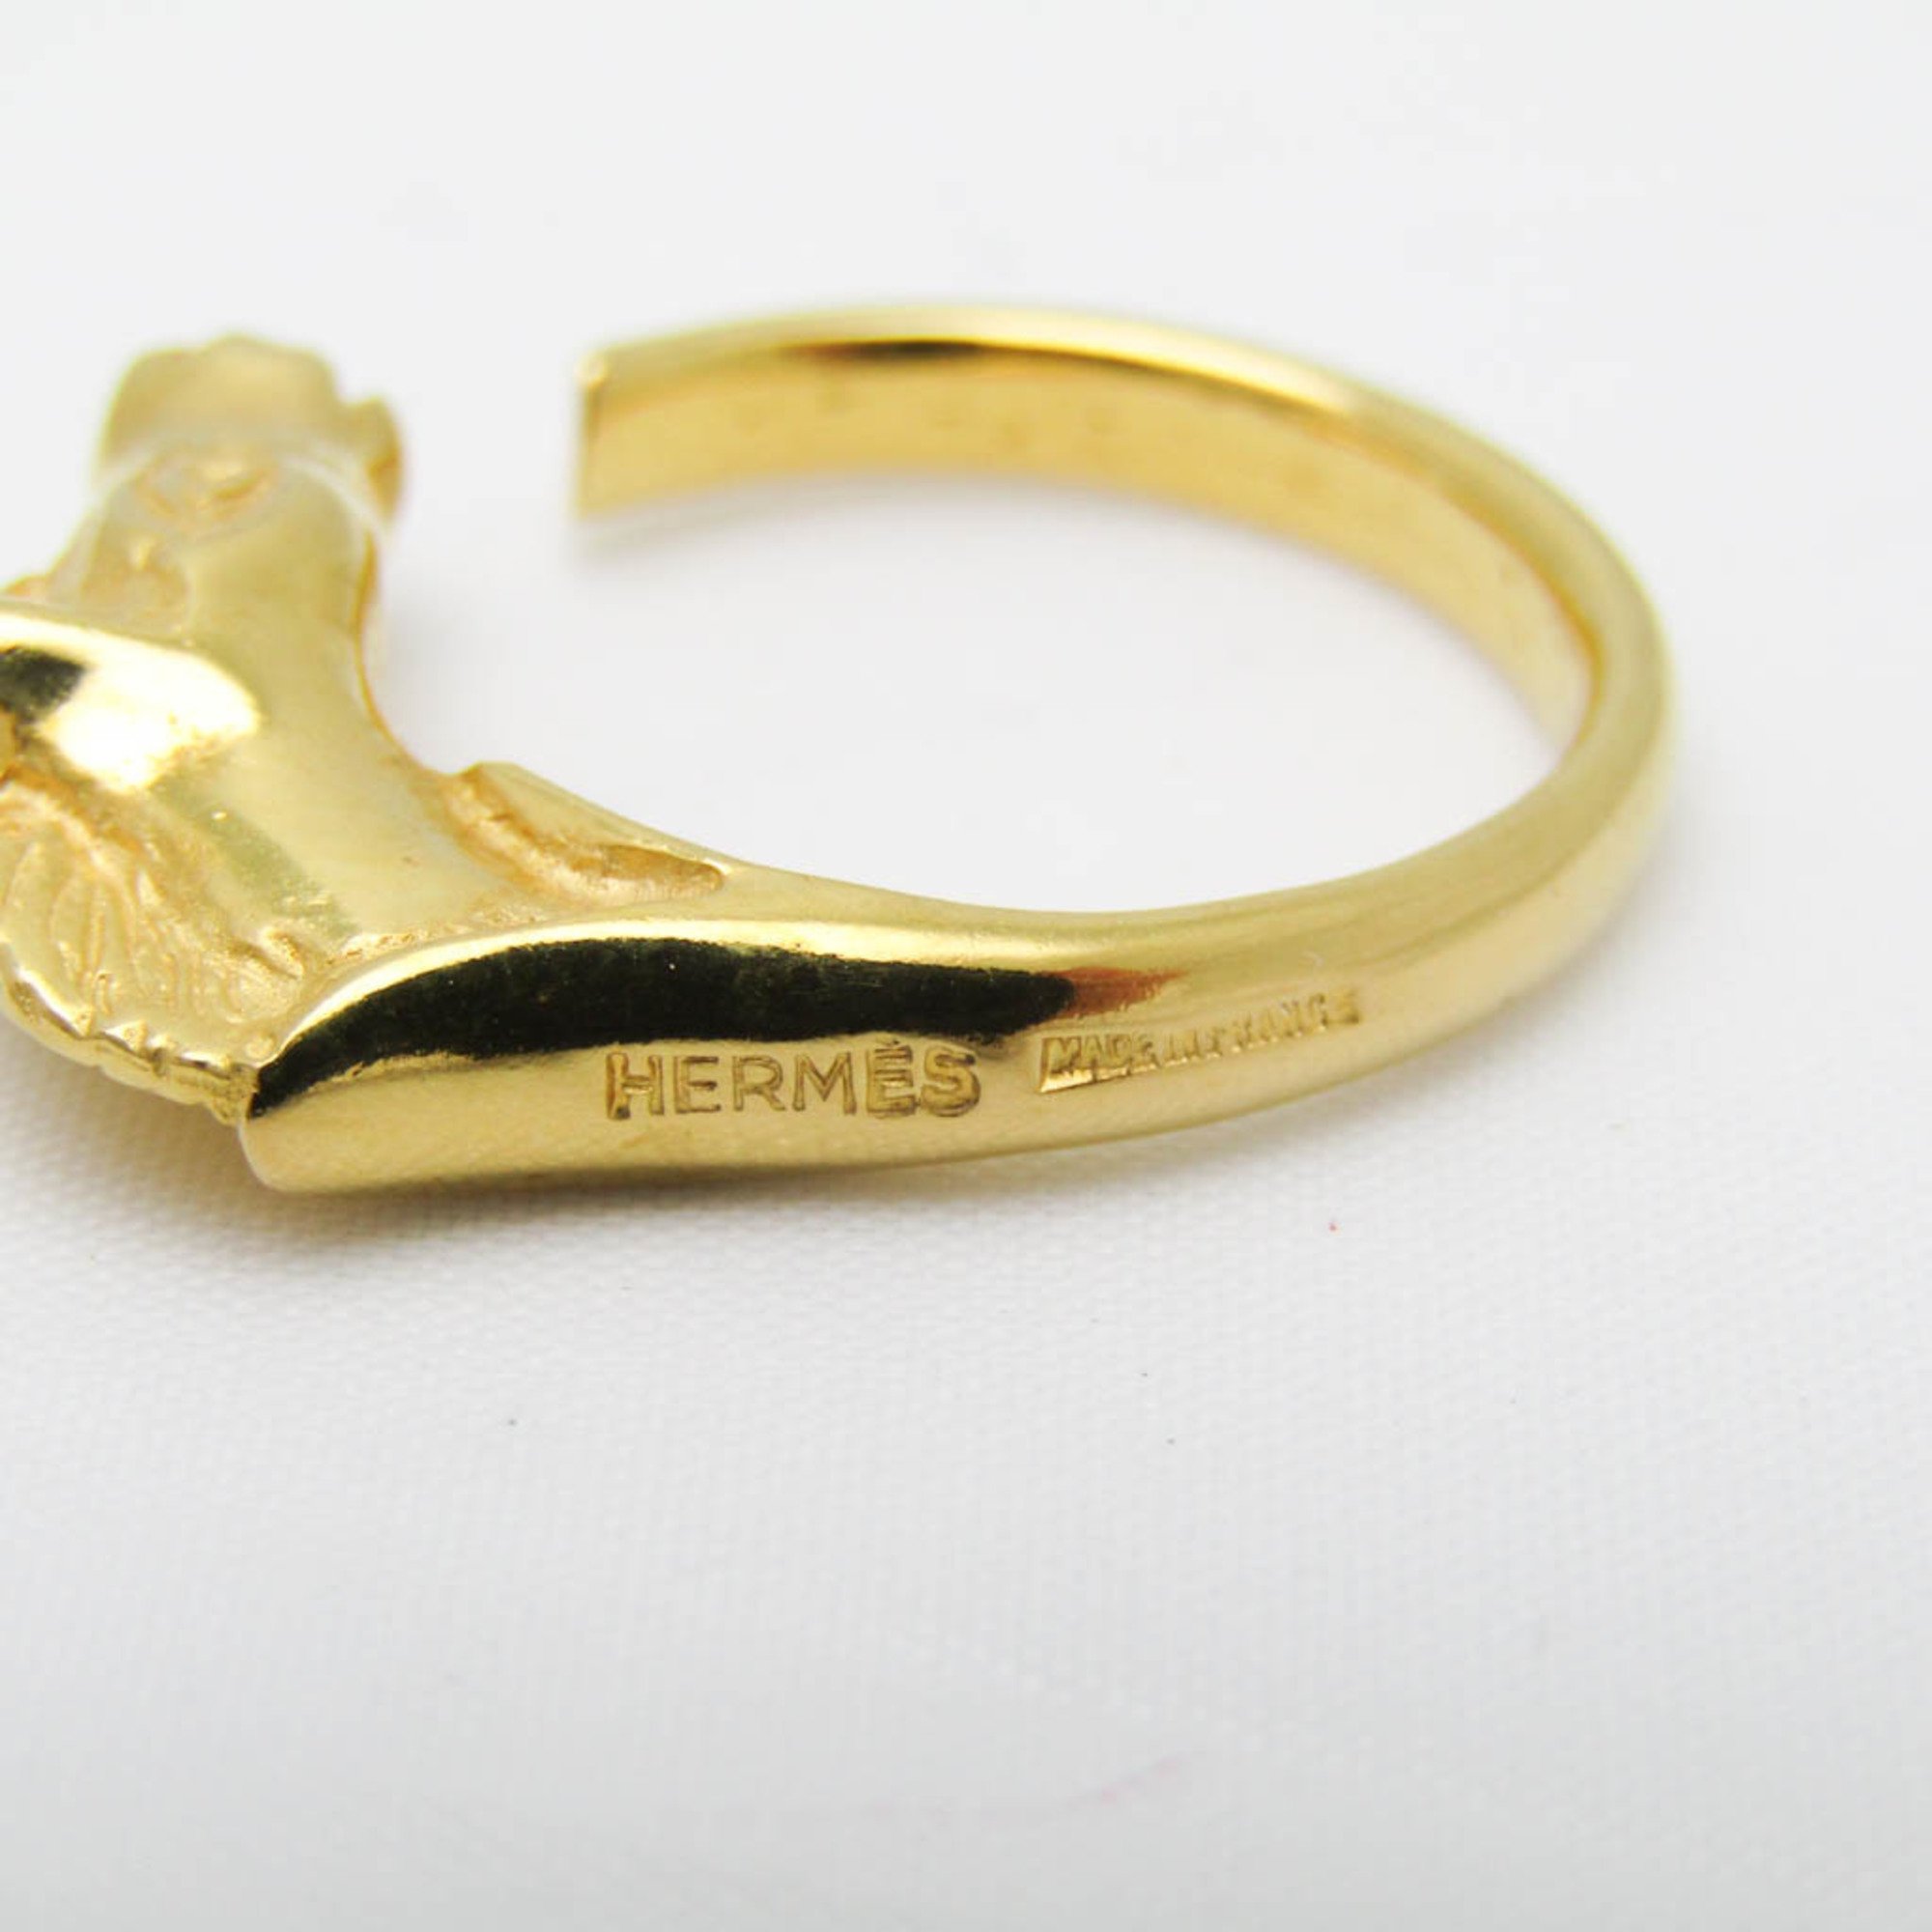 Hermes Cheval Metal Band Ring Gold